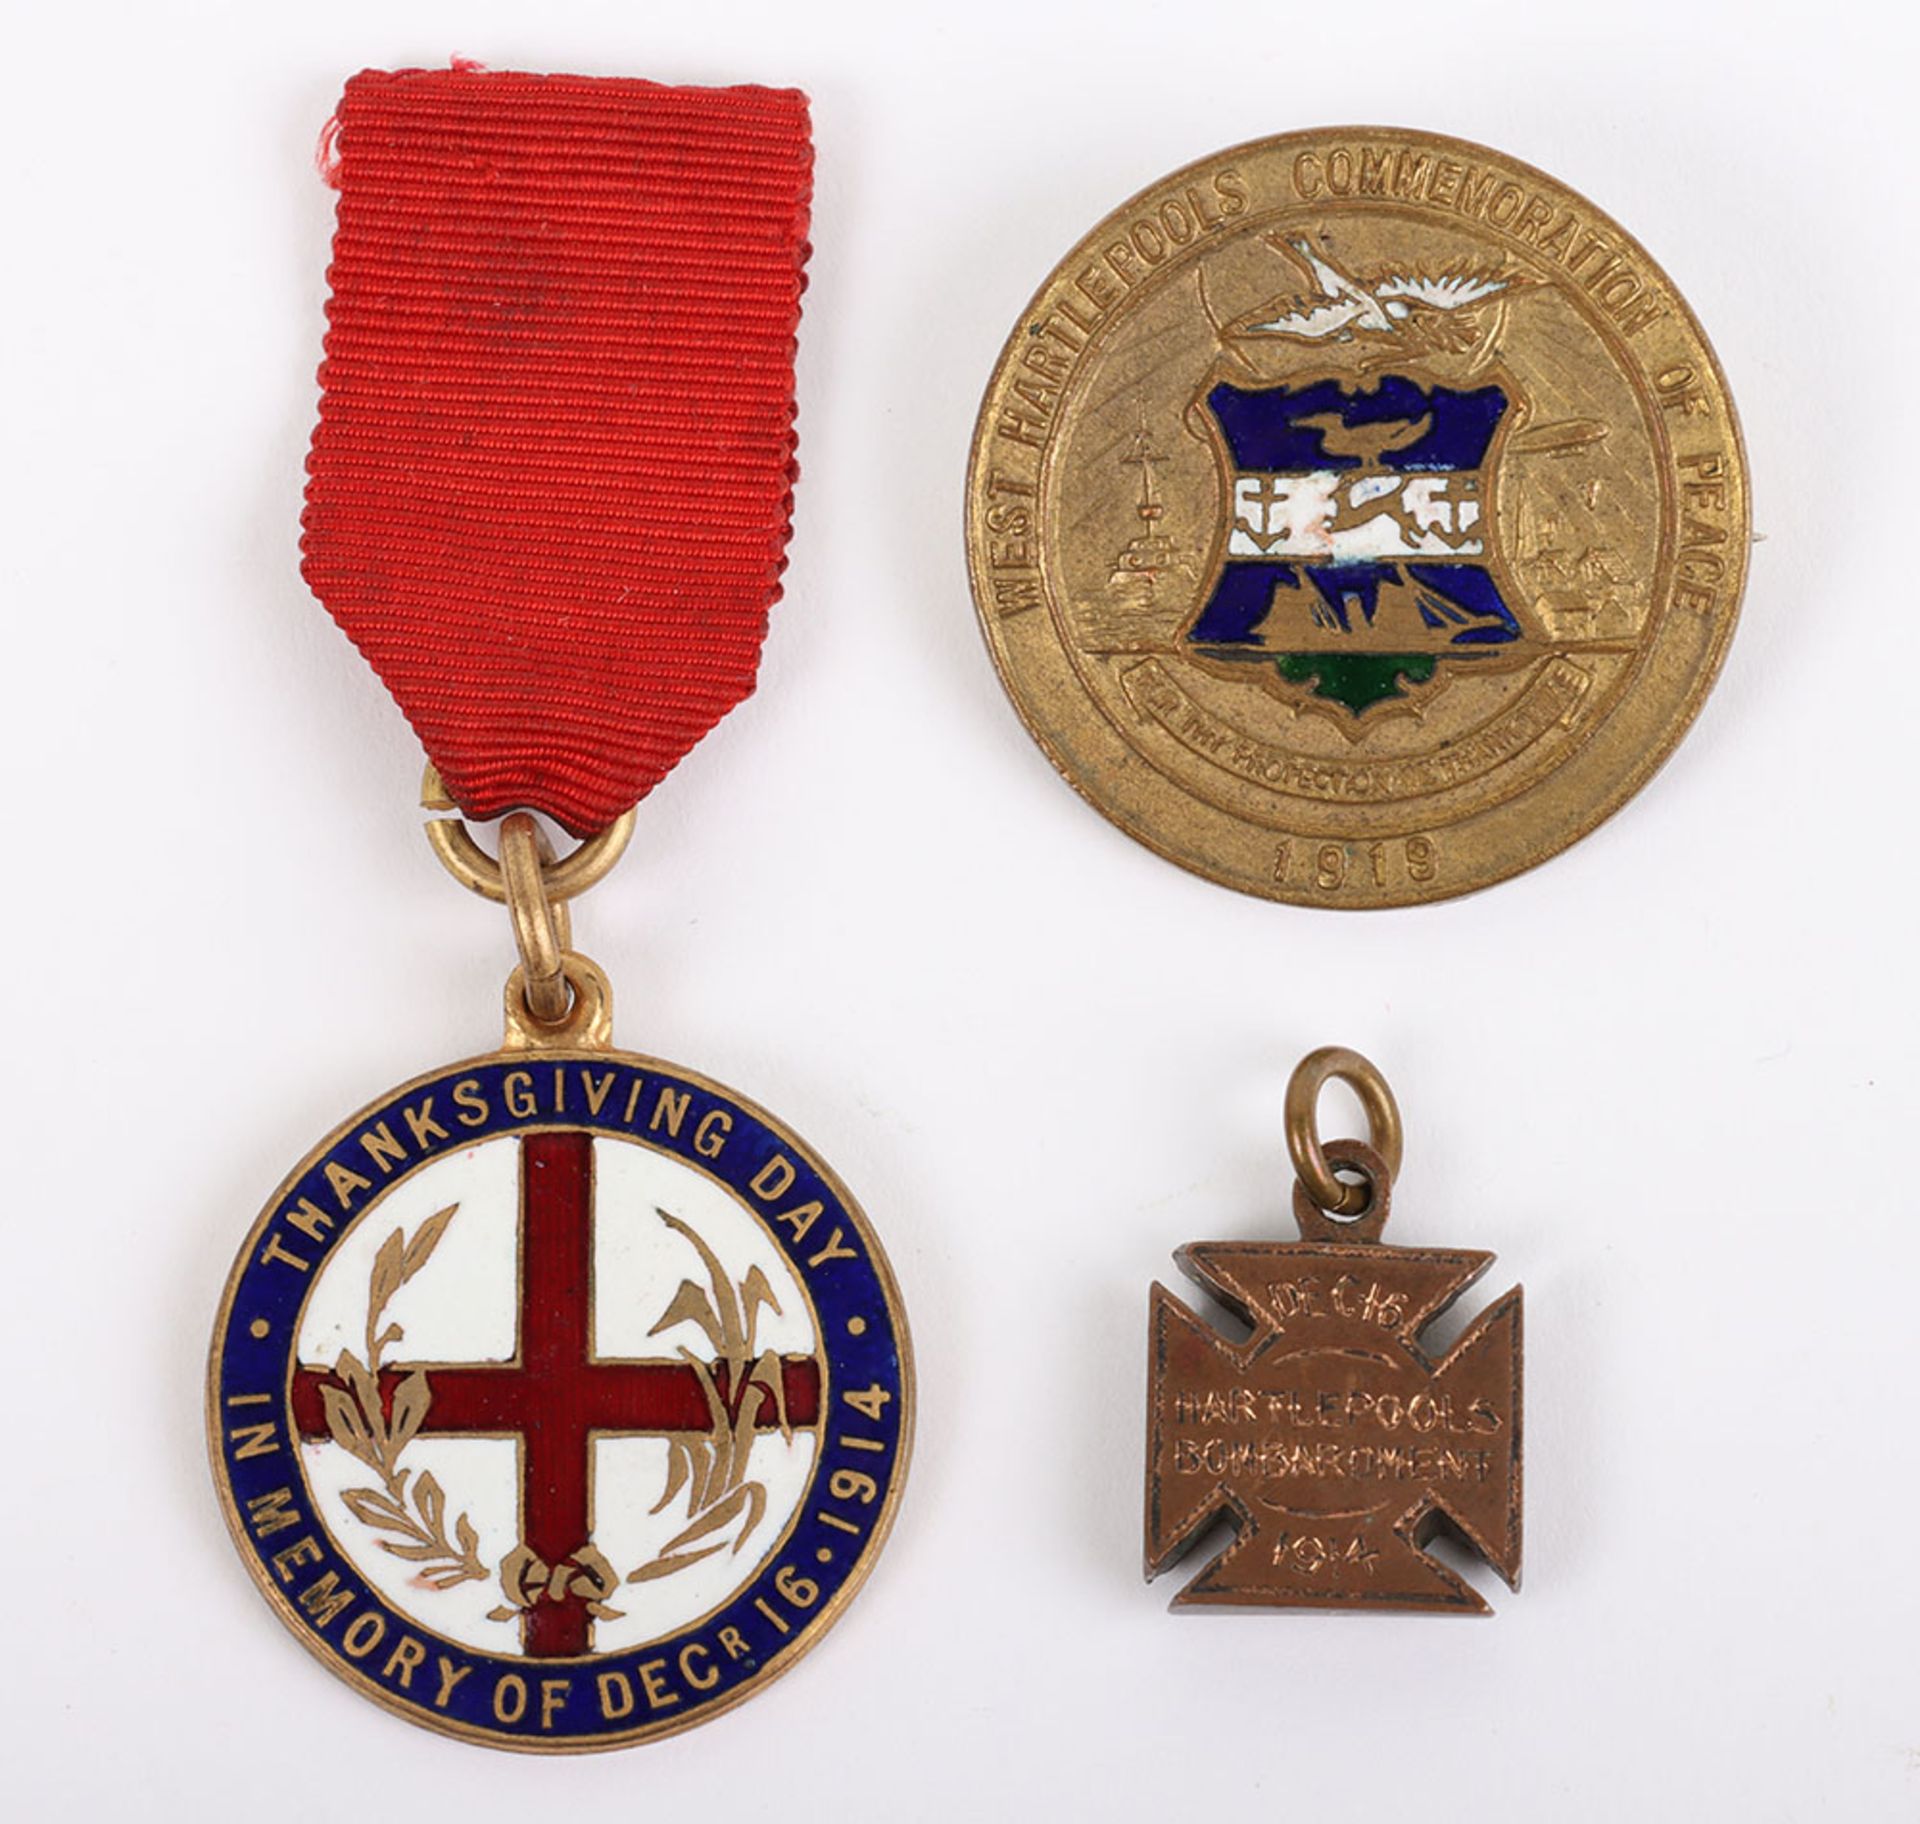 An Unusaual Collection of Commemorative Medalions Relating to the Coastal Town of Hartlepool During